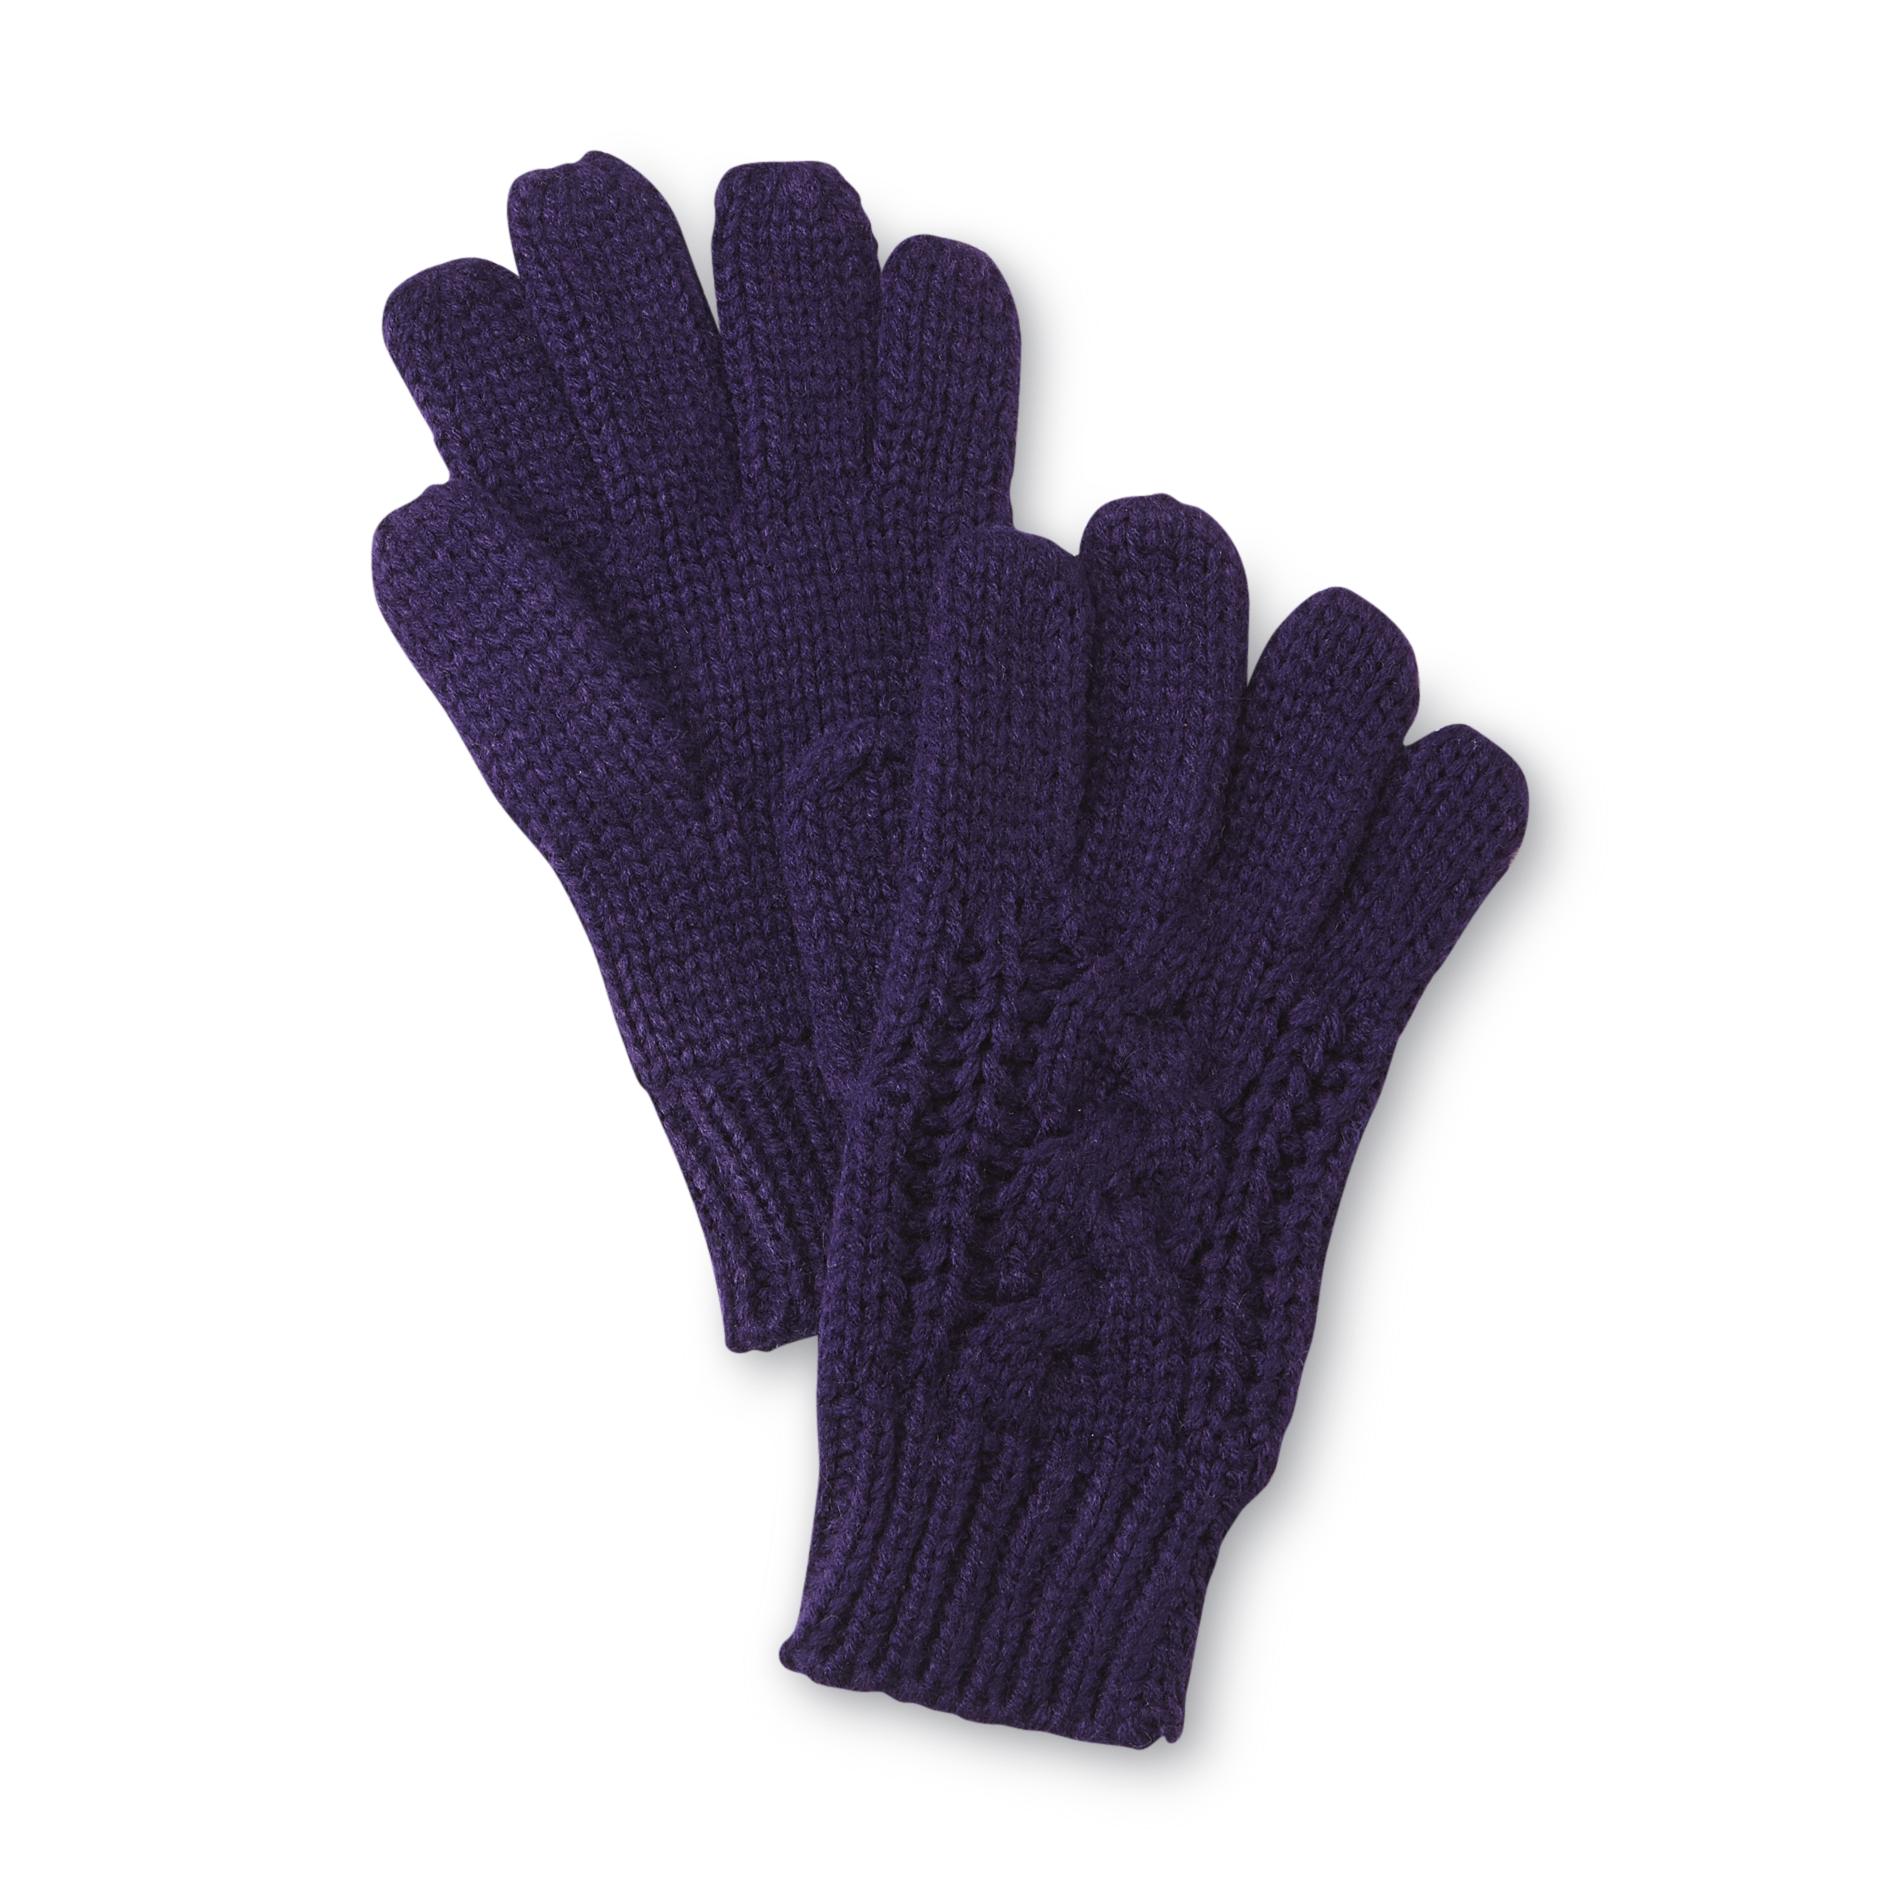 Jaclyn Smith Women's Cable Knit Gloves